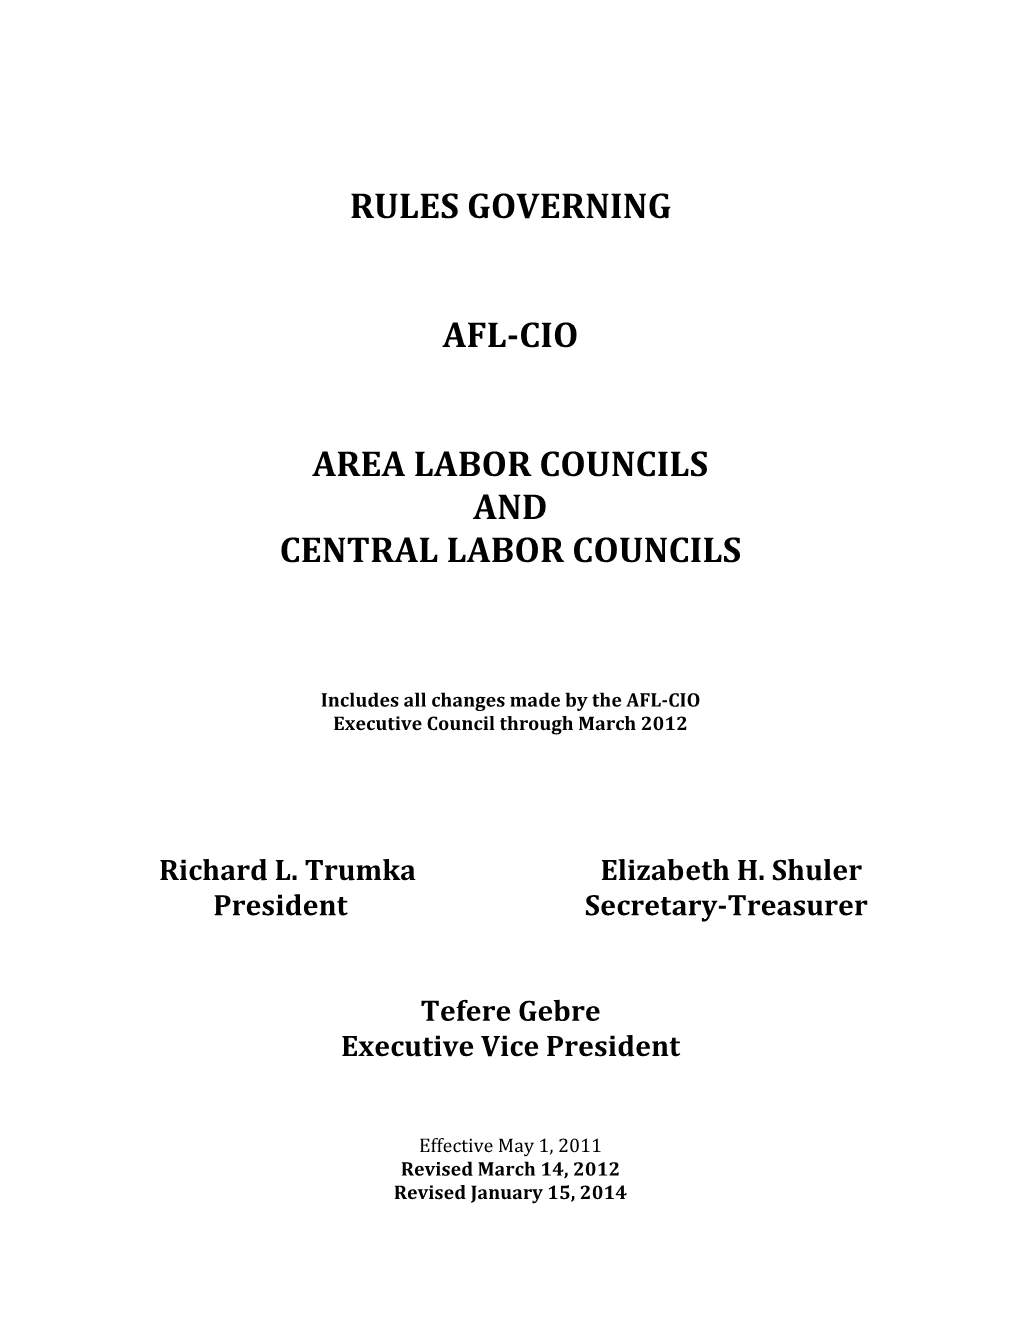 Rules Governing Afl-Cio Area Labor Councils And